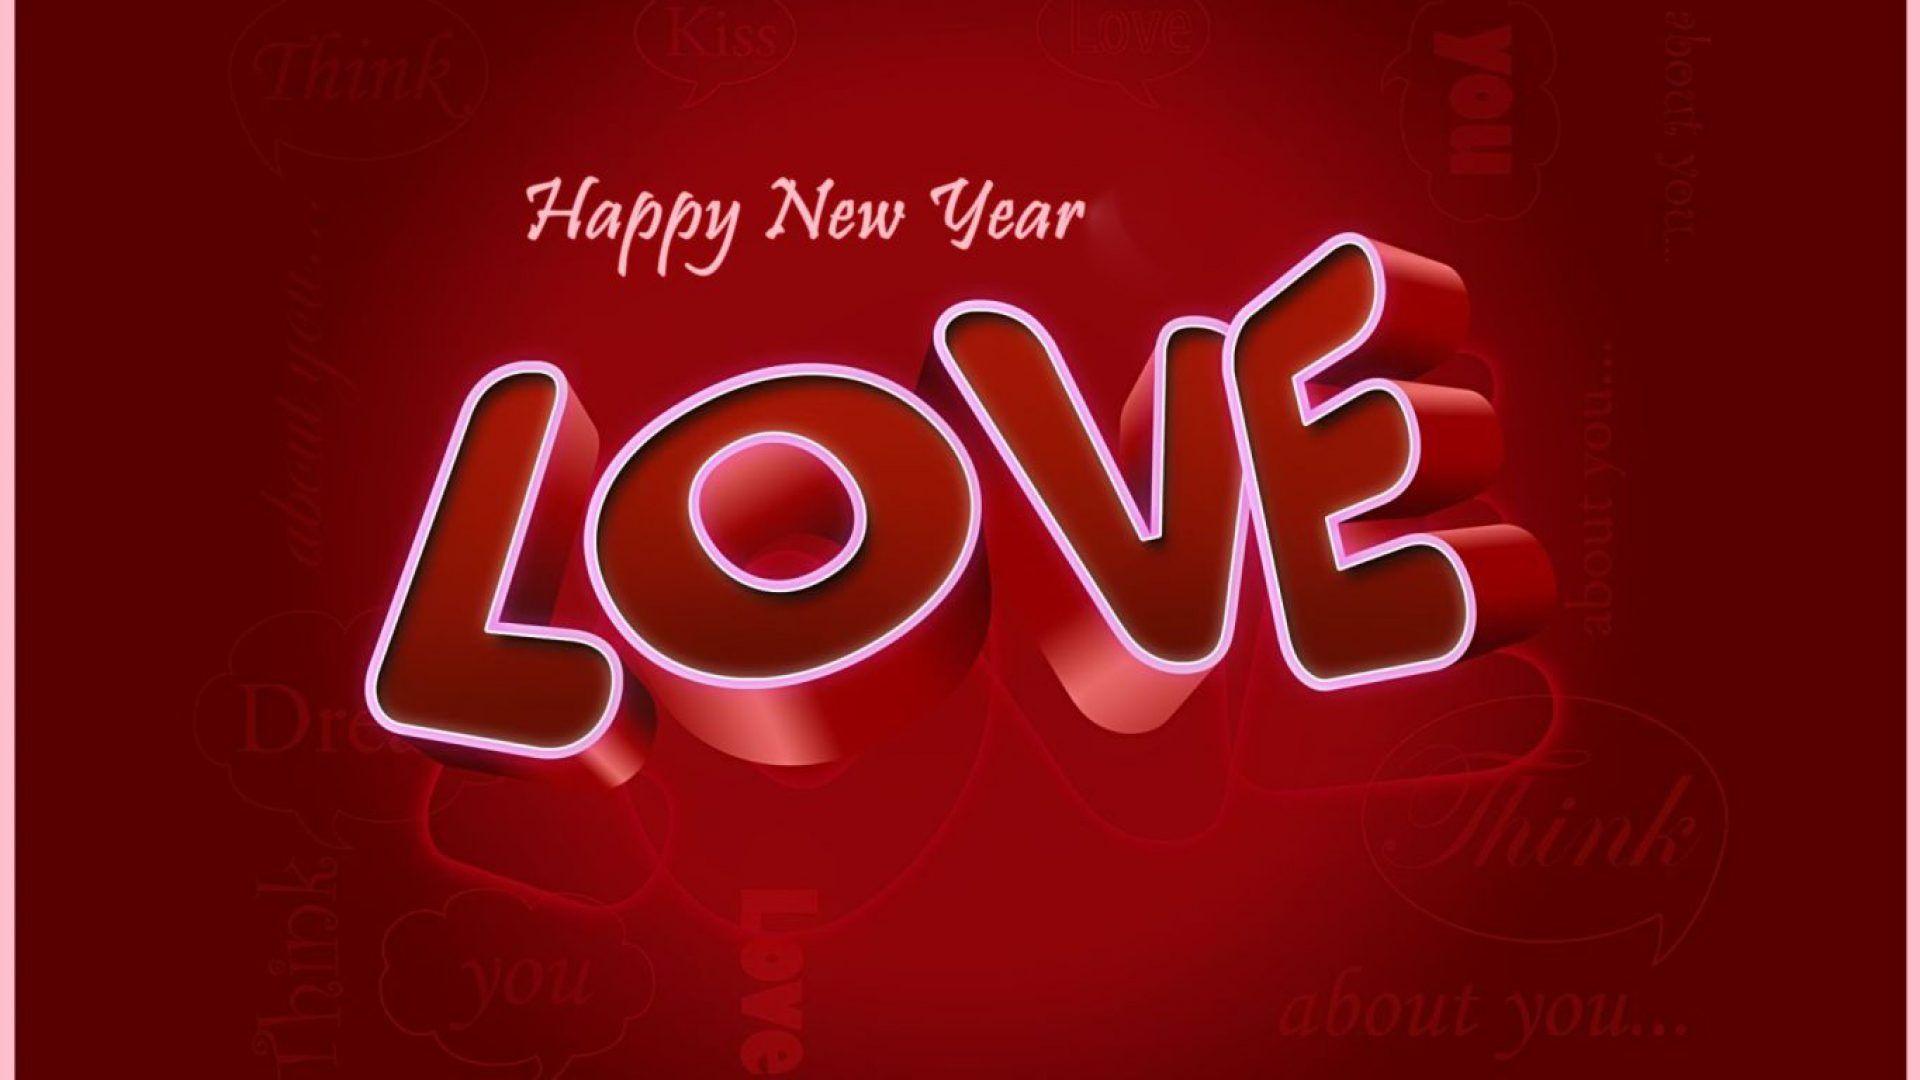 New Years Quotes About Family And Love Dual Screen Wallpaper